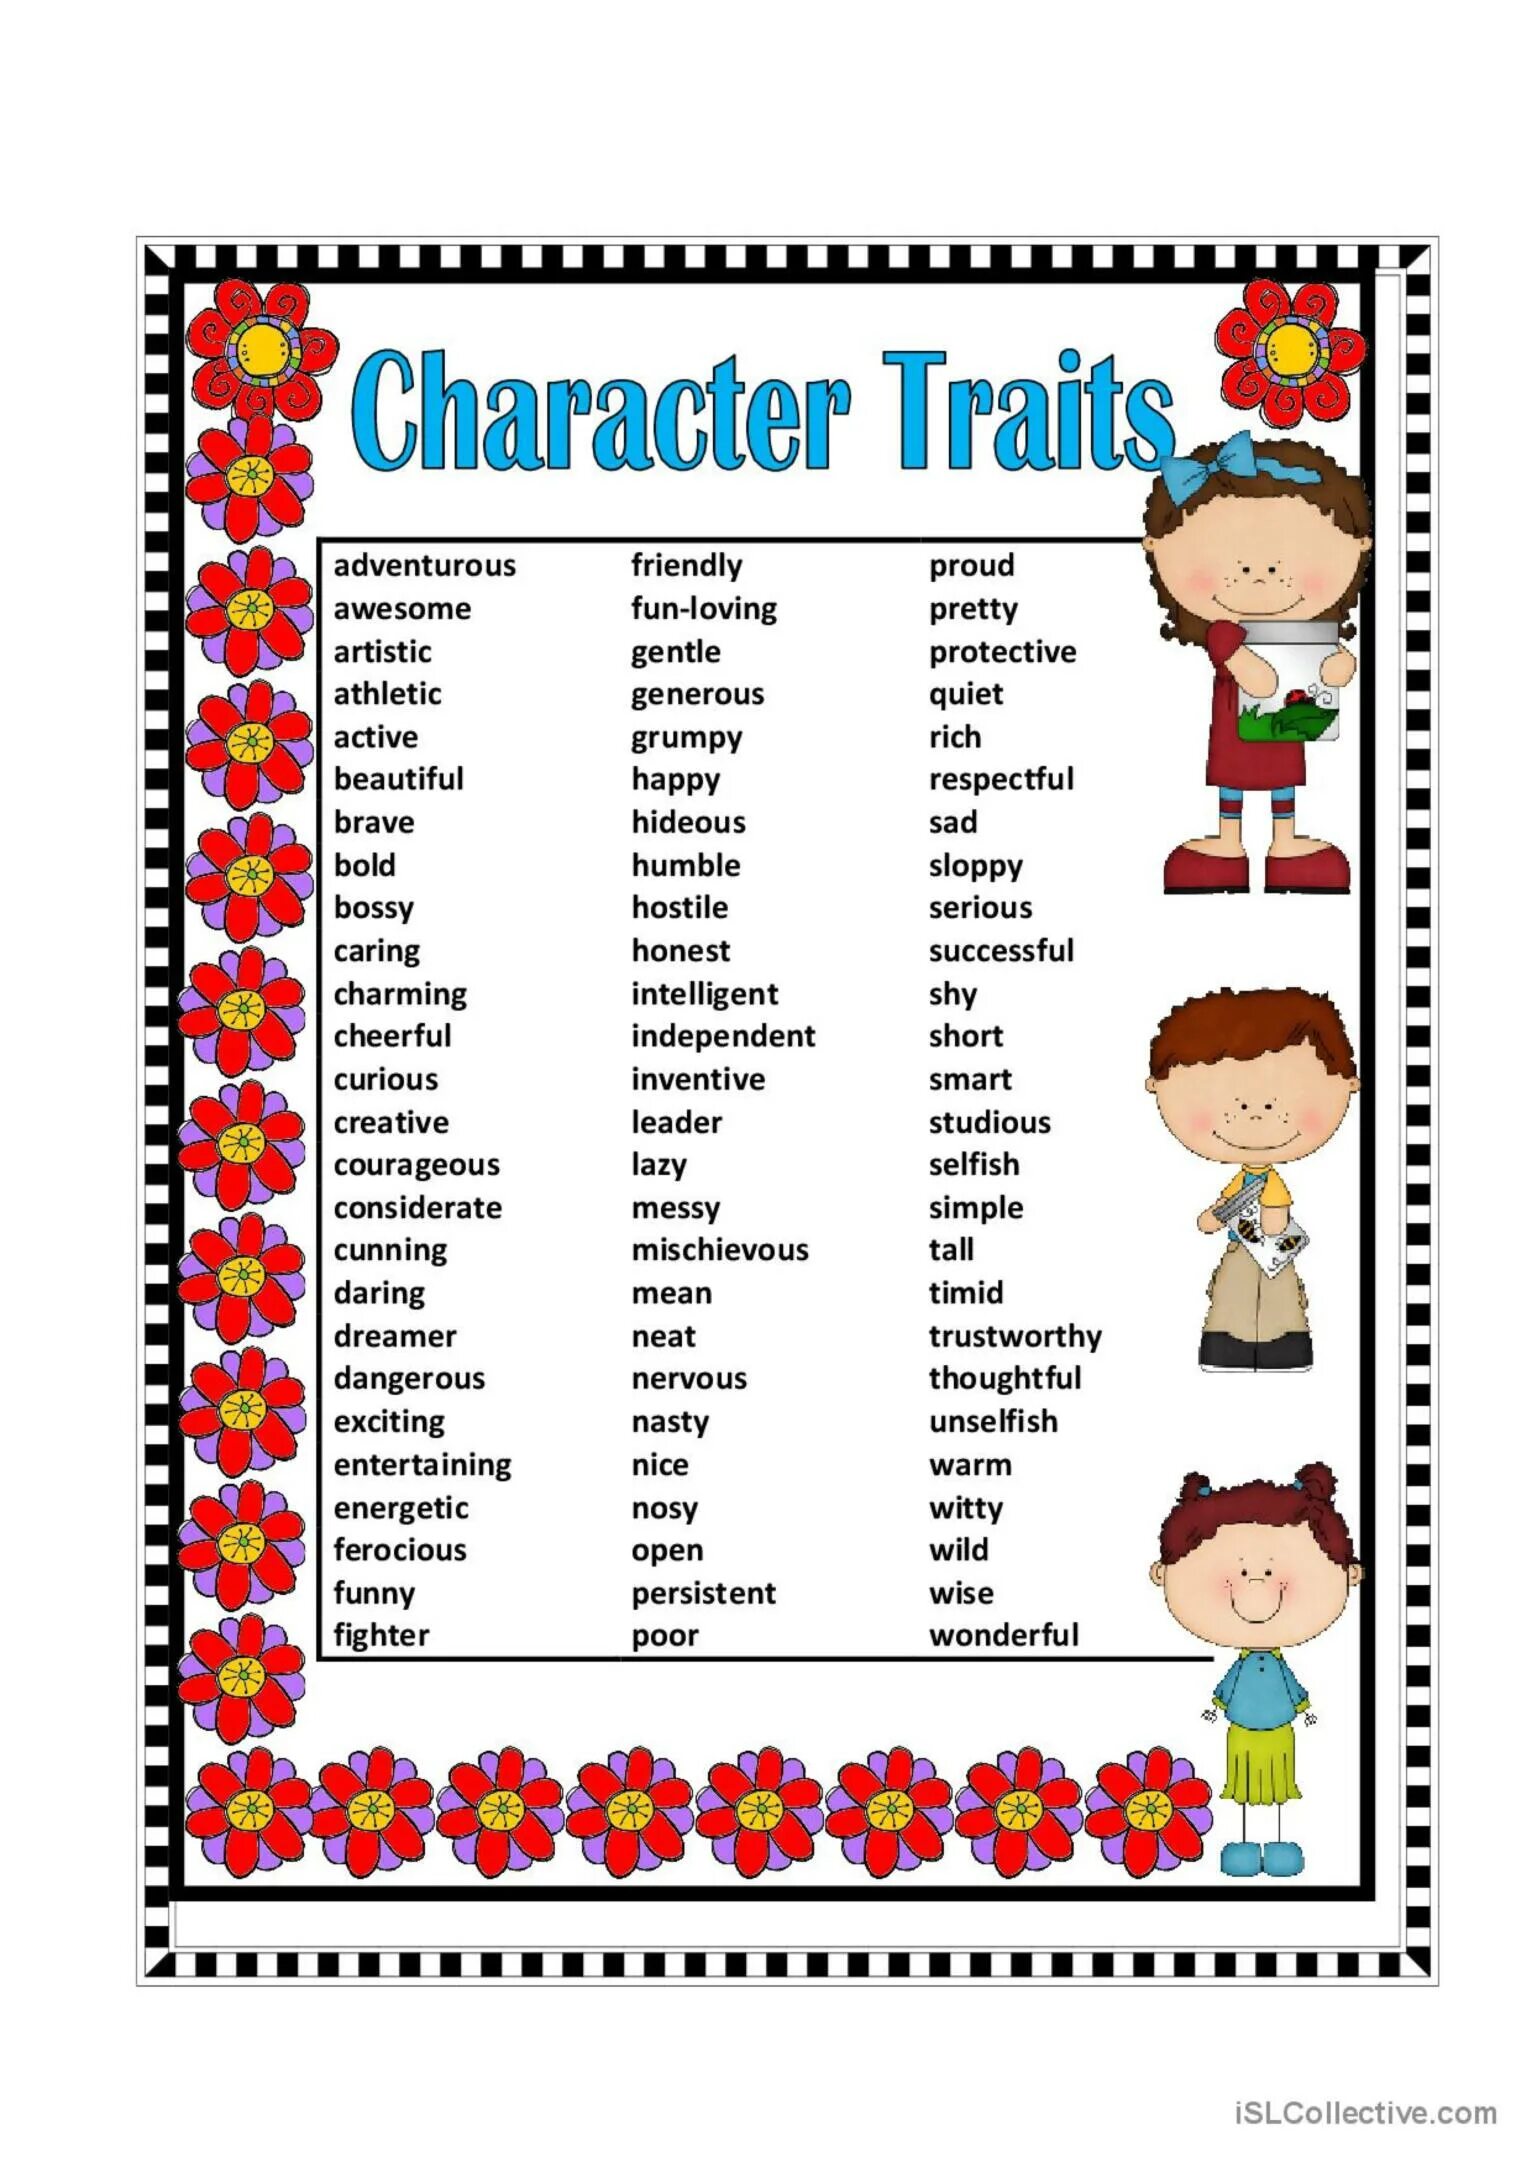 Adjectives traits of character. Traits of character Worksheet. Character traits for Kids. Задания на traits of character.